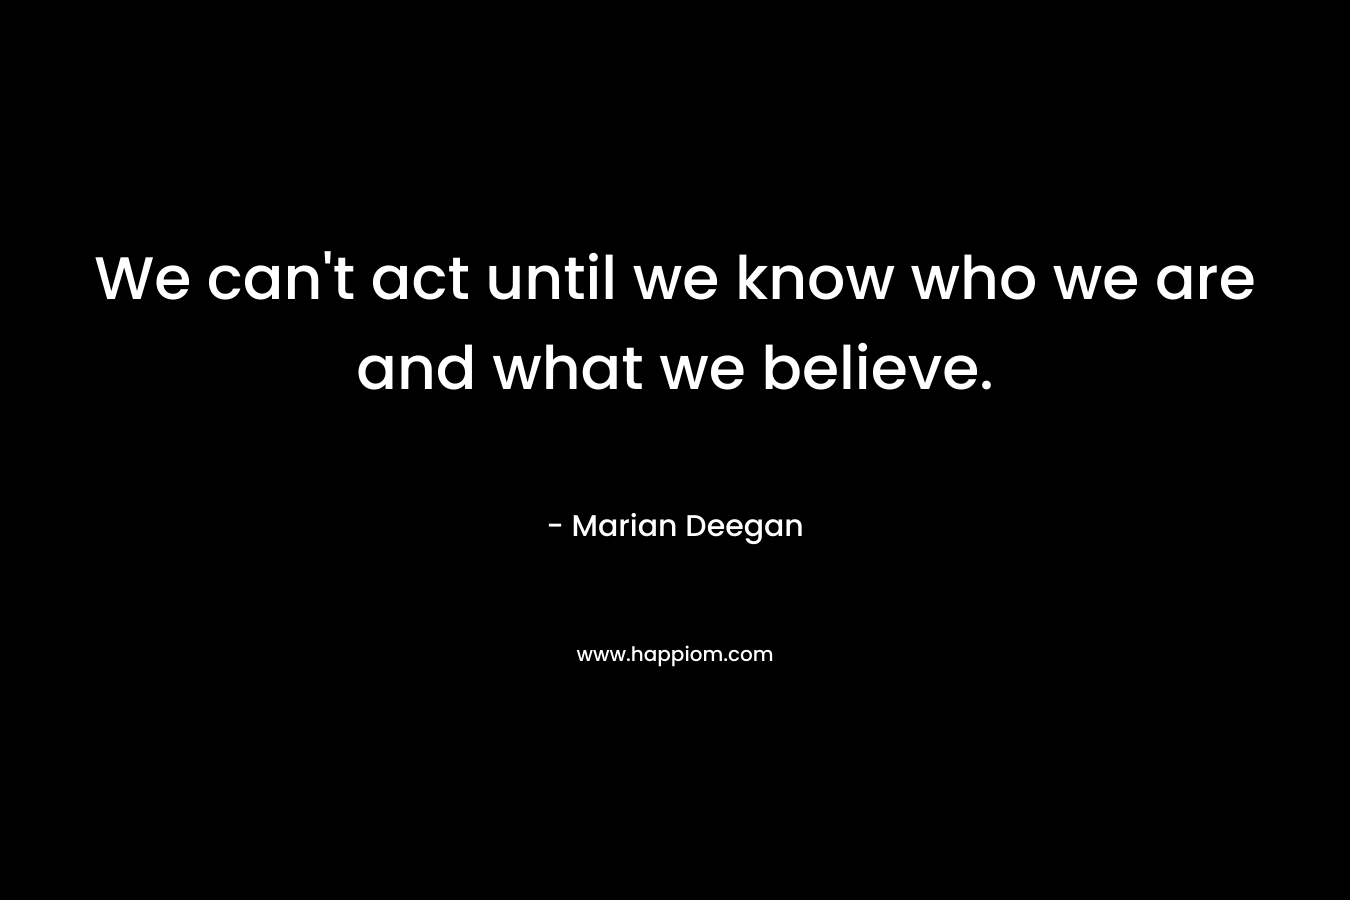 We can’t act until we know who we are and what we believe. – Marian Deegan